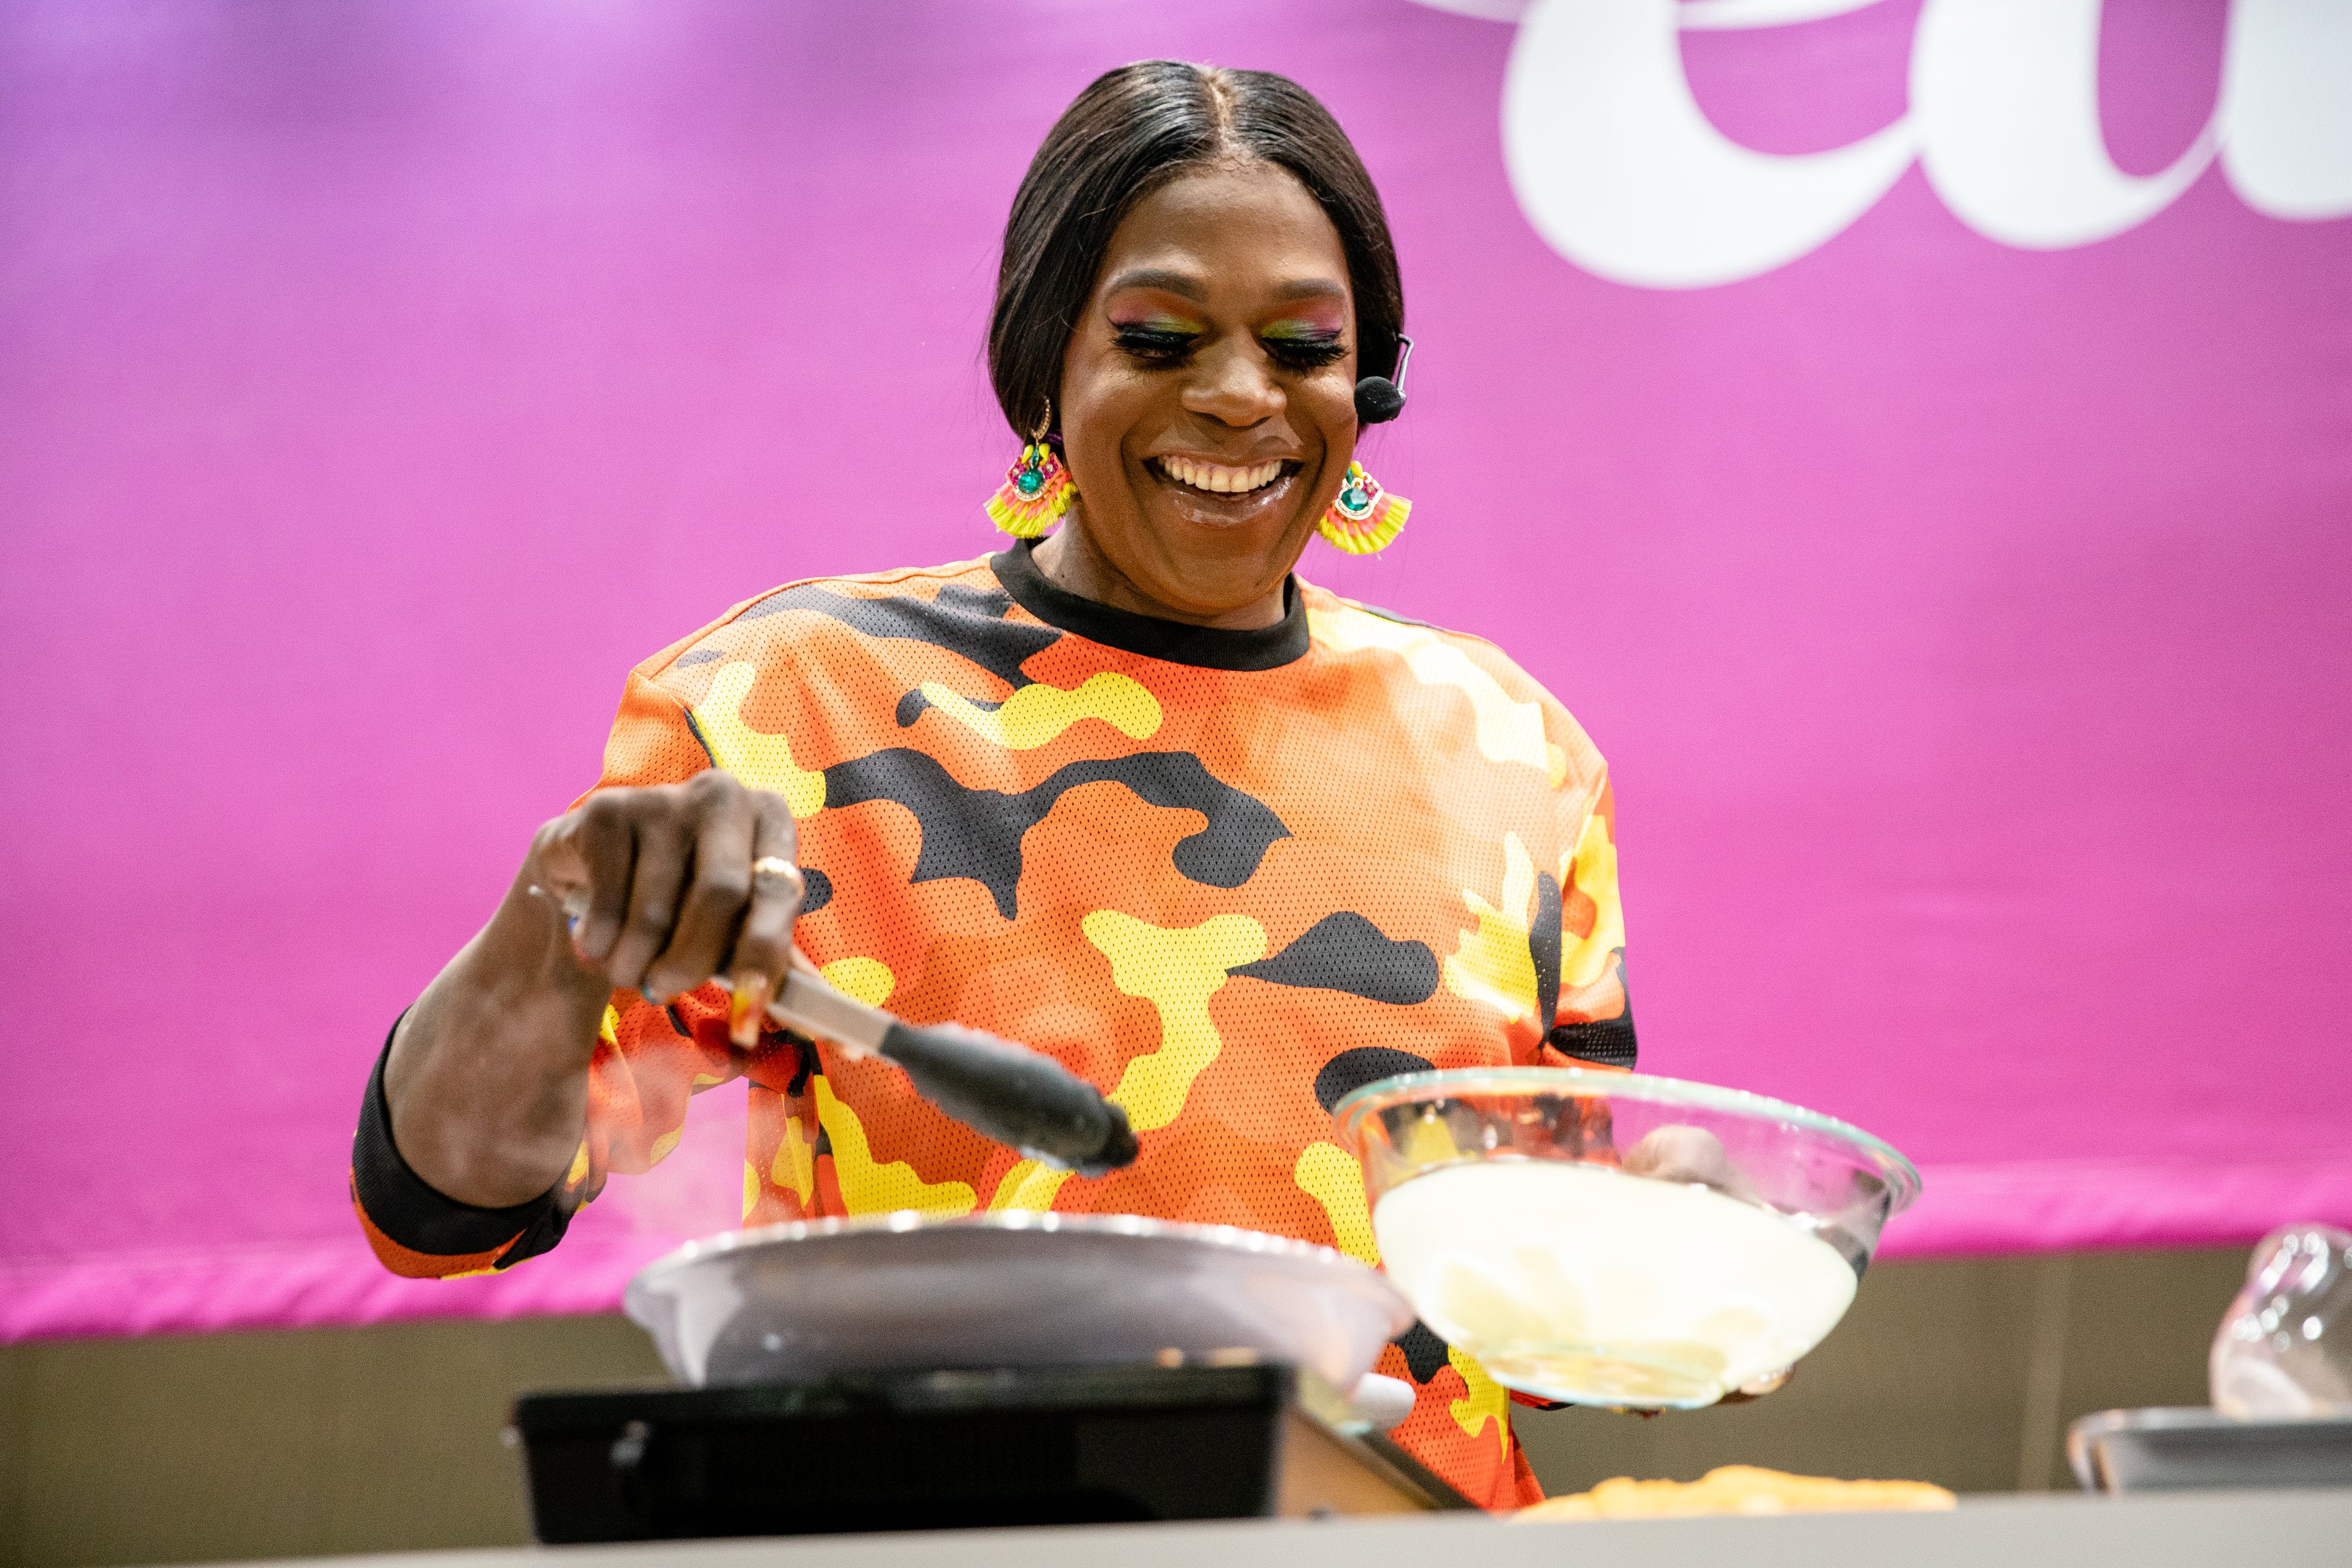 Big Freedia Whips Up Her Famous 'Booty Popping Potatoes' That Have Flavor And Bounce By The Ounce